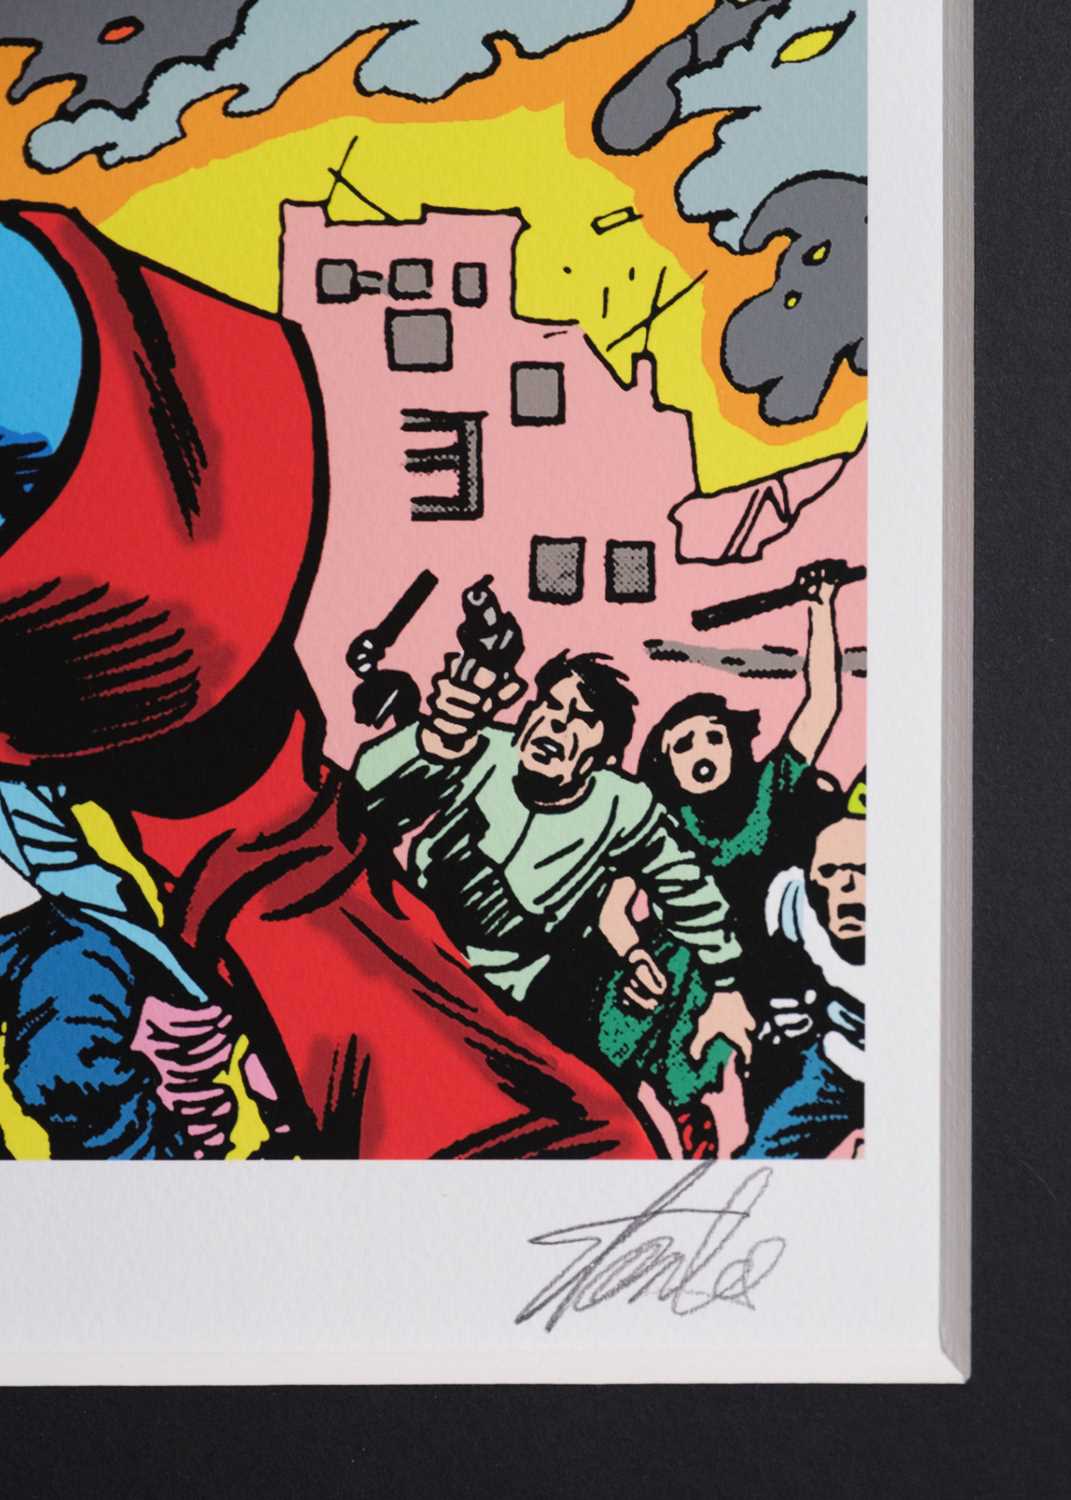 (Signed) Stan LEE (1922-2018) Captain America #193 - Madbomb (2016) - Image 3 of 5